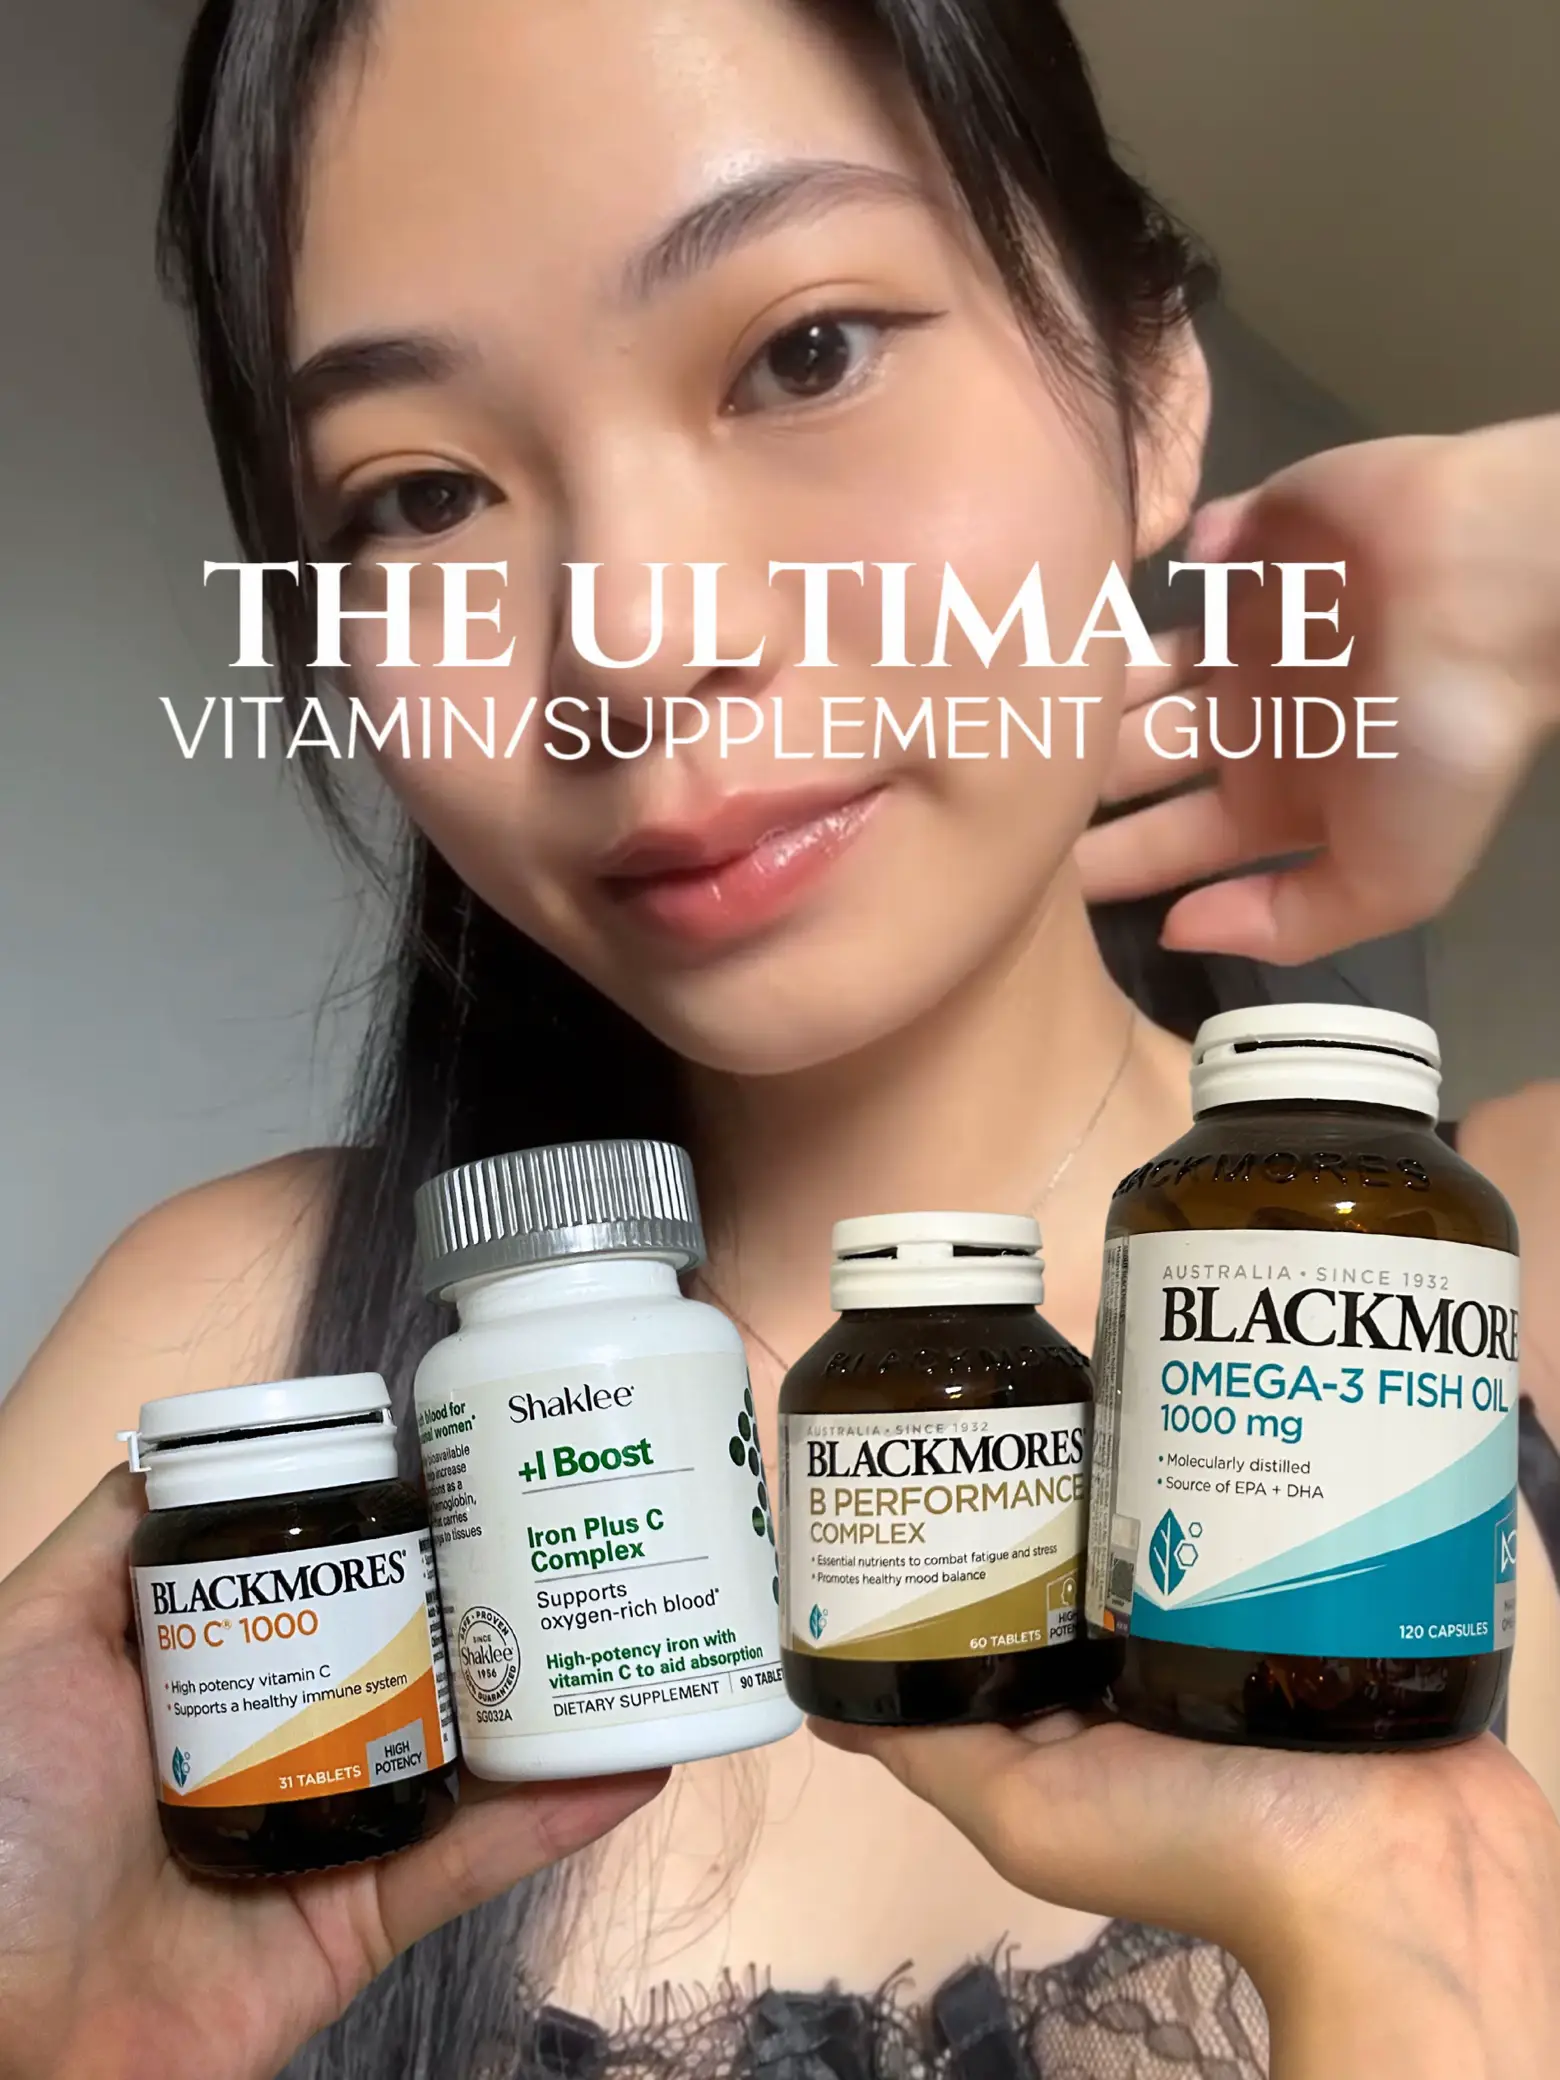 the most comprehensive vitamin/supplement guide 💊's images(0)